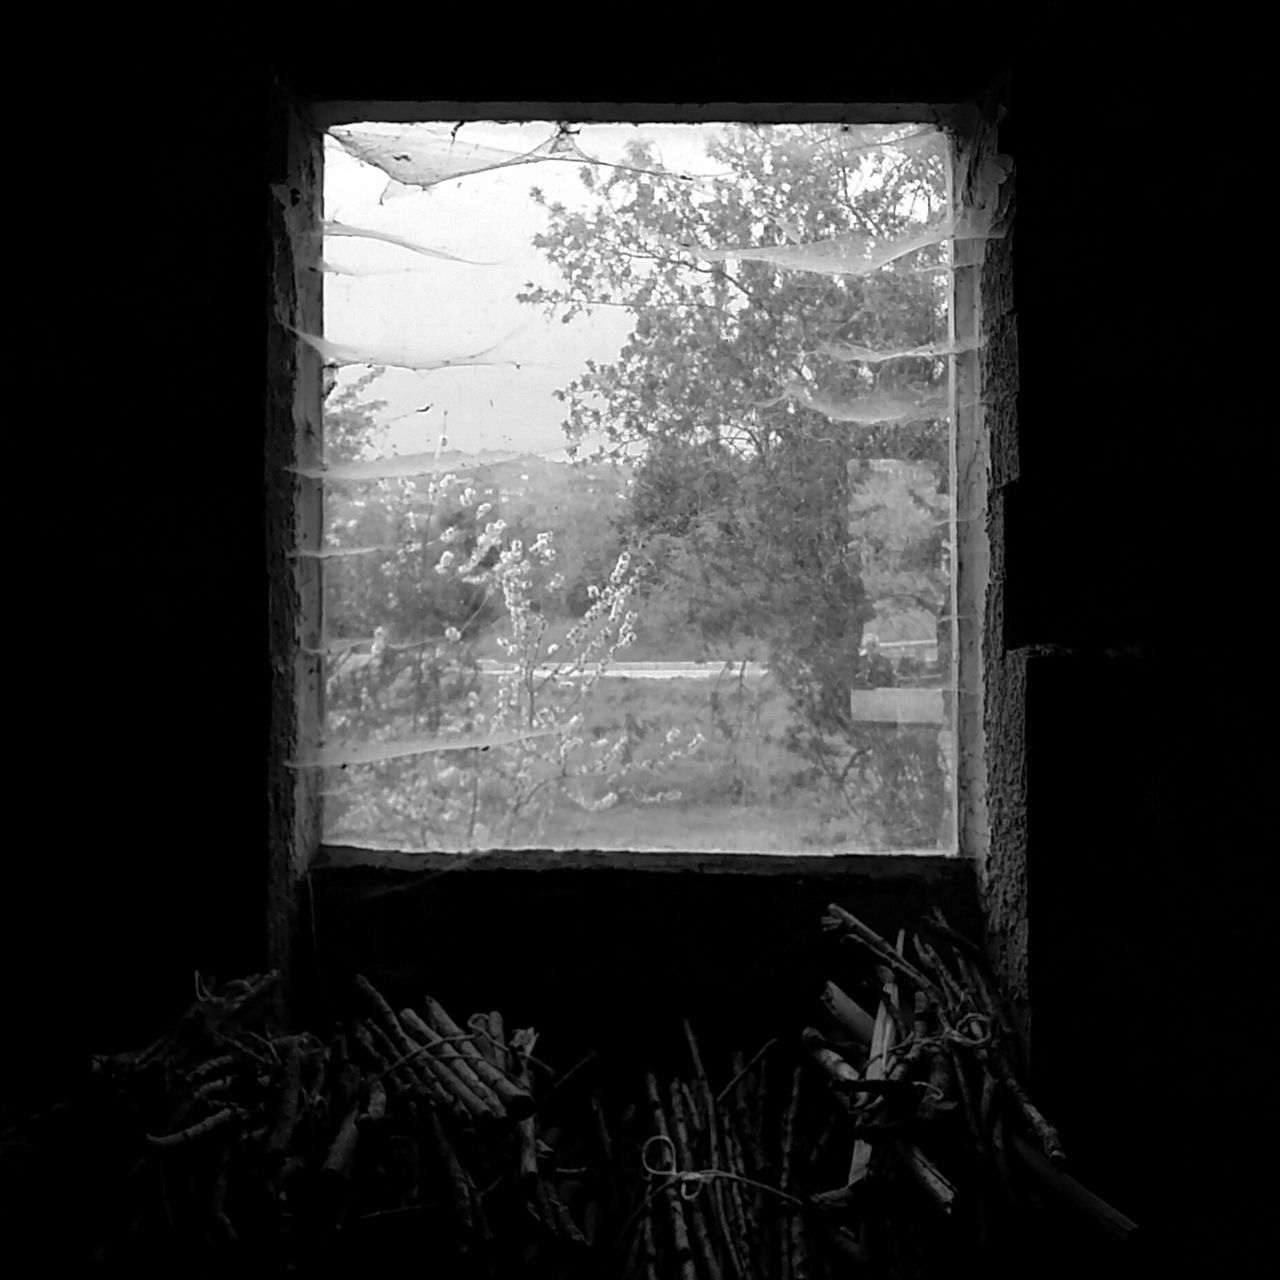 window, indoors, abandoned, house, glass - material, home interior, obsolete, damaged, transparent, built structure, architecture, curtain, wall - building feature, day, no people, absence, plant, old, open, broken